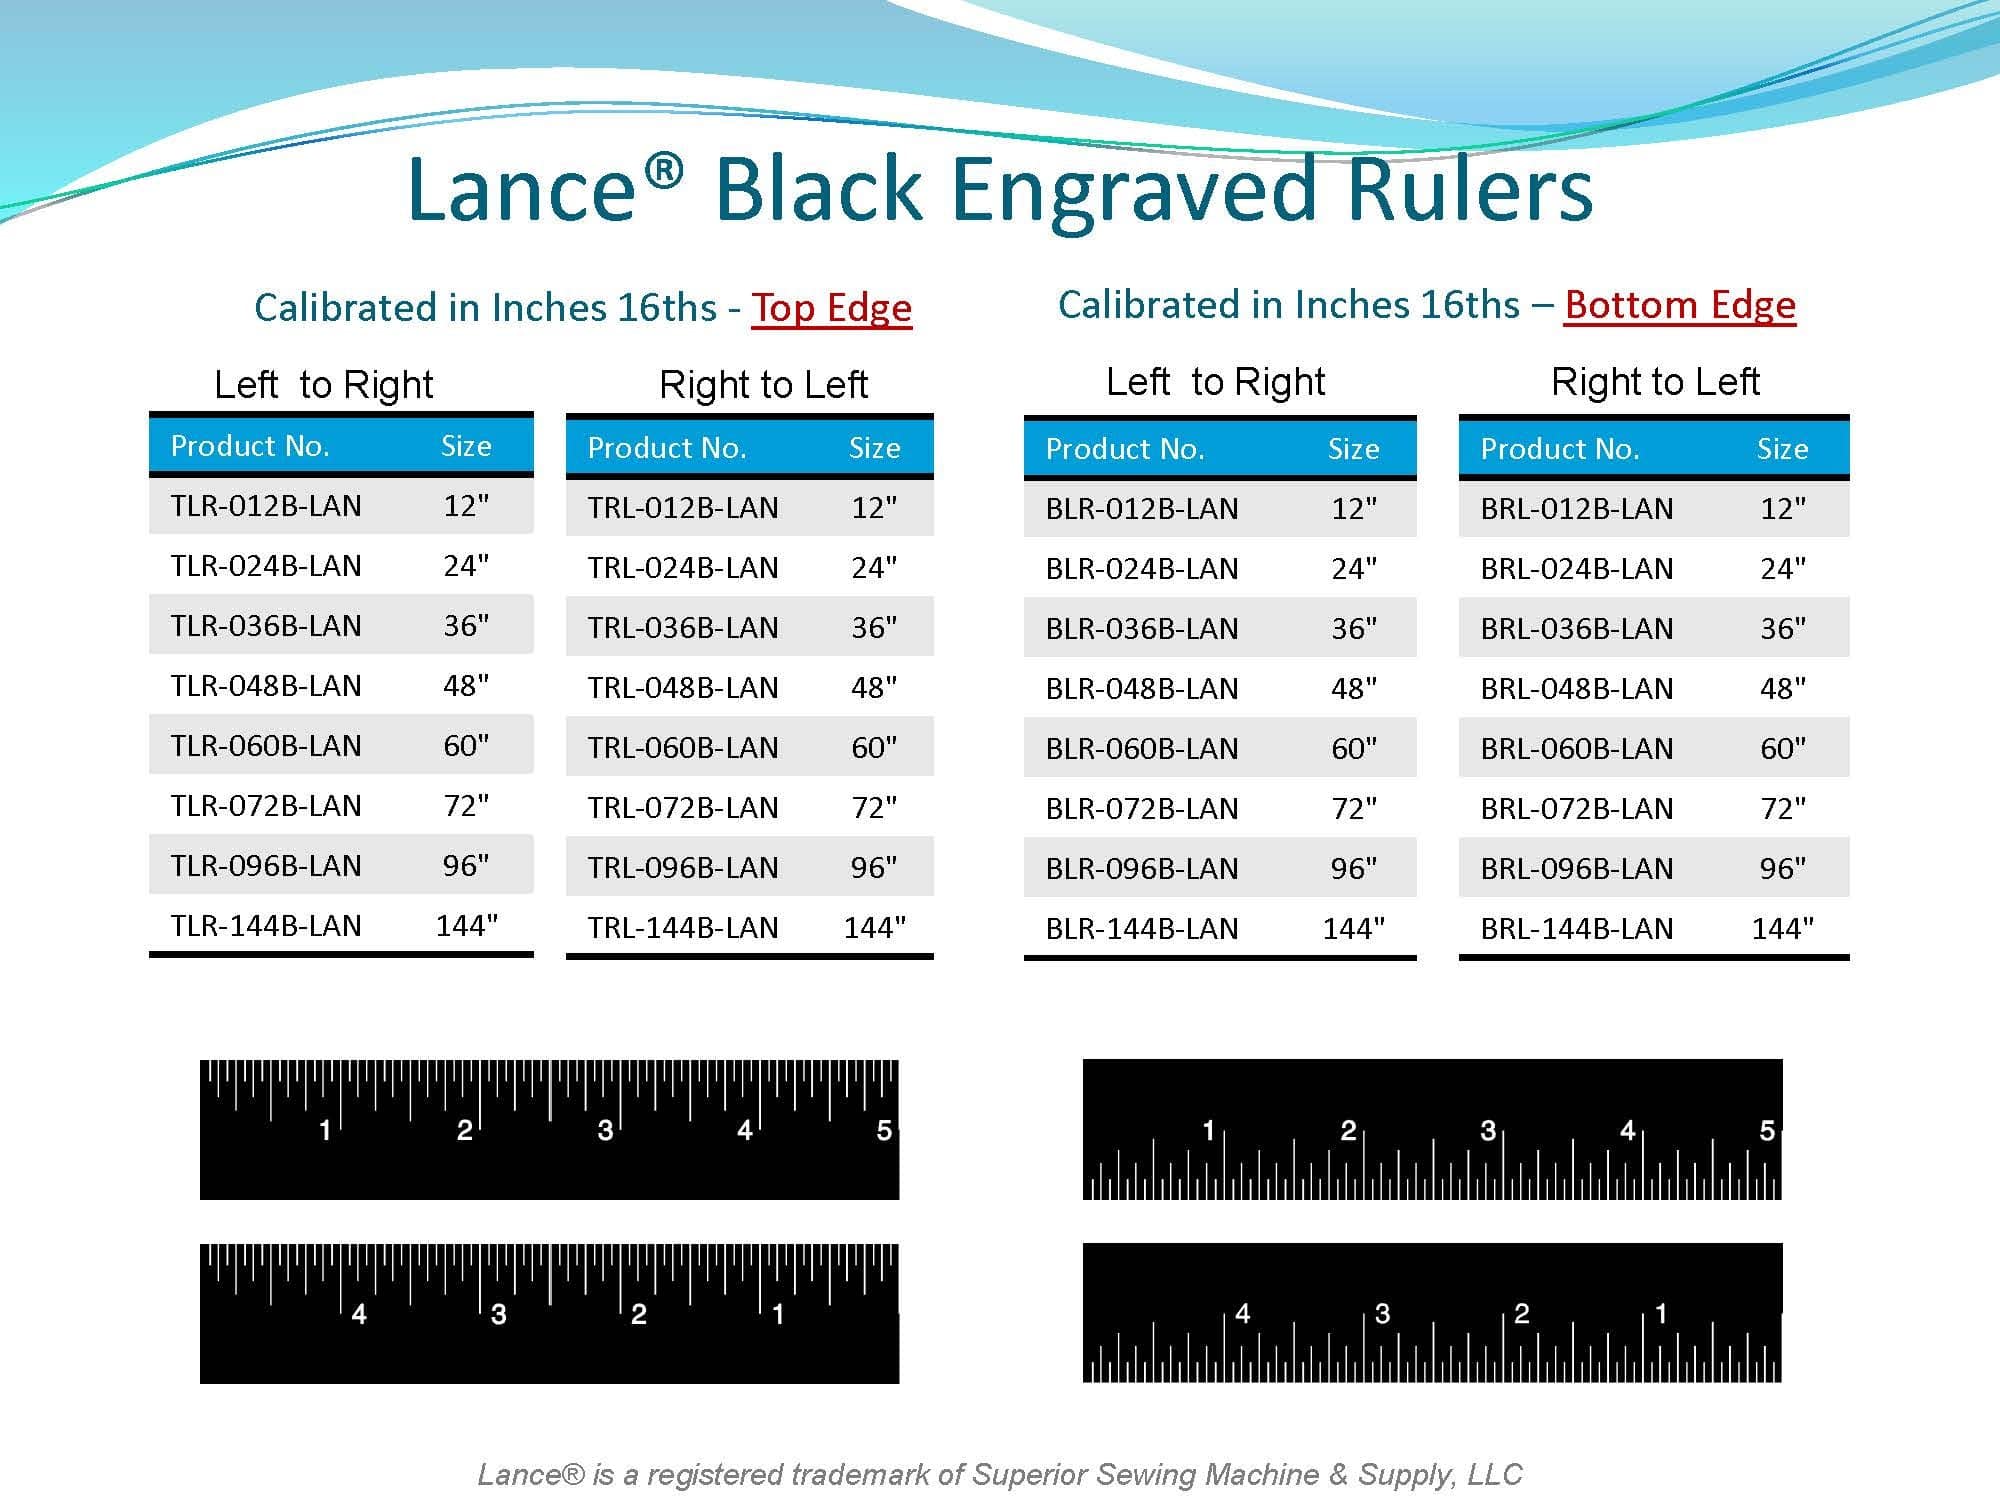 LANCE L-SQUARE  
BLACK ENGRAVED RULERS
CALIBRATED in INCHES or 16ths
TOP EDGE or BOTTOM EDGE
AVAILABLE IN 12" to 144"
